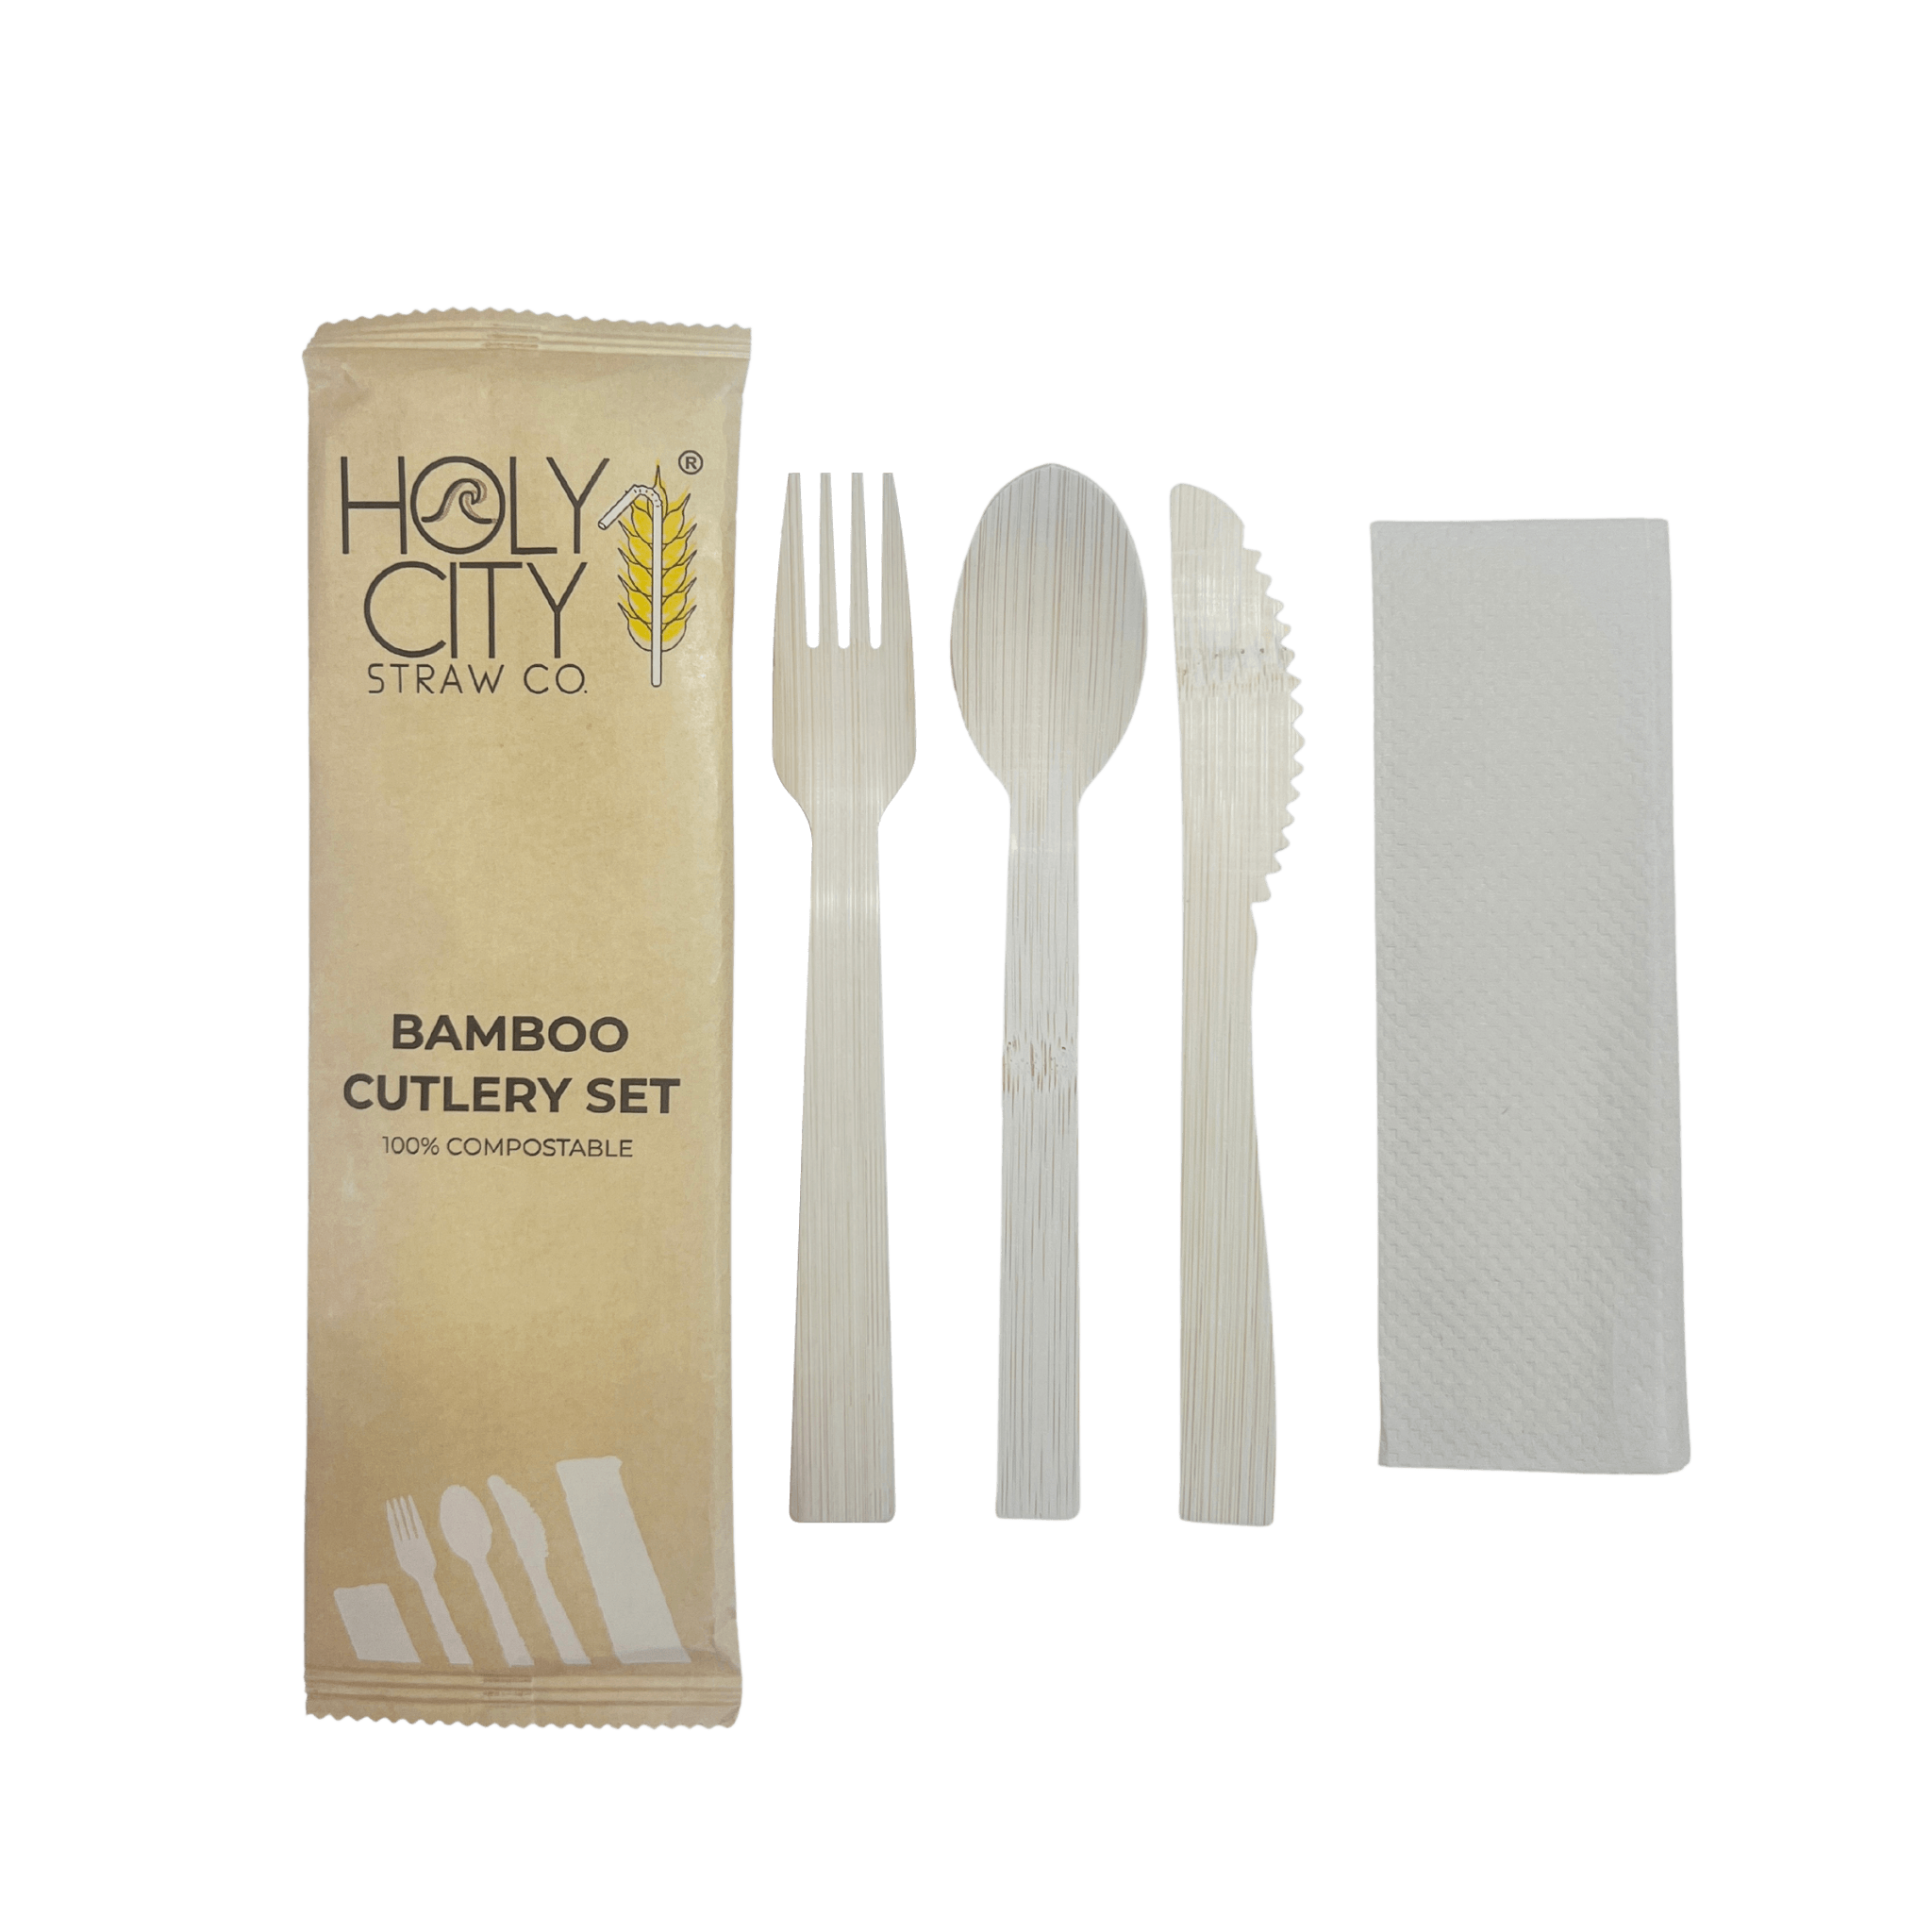 Wrapped Bamboo Cutlery Set | Sample